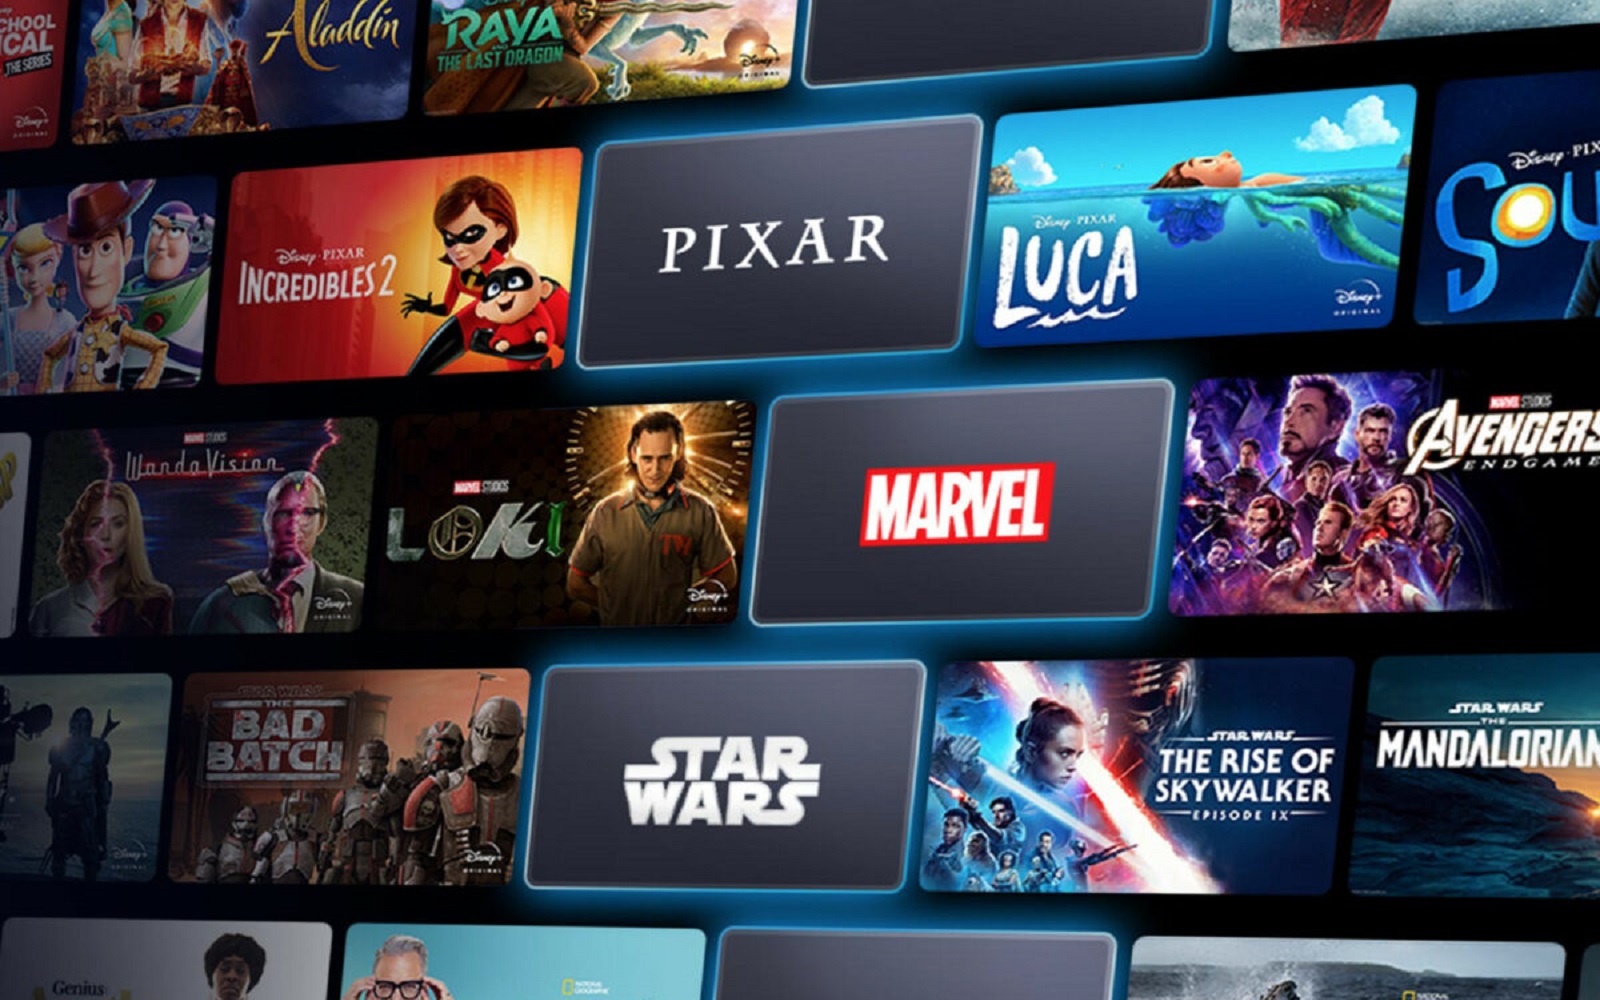 Disney+ with a better start in Poland than HBO Max.  Great start to a new platform